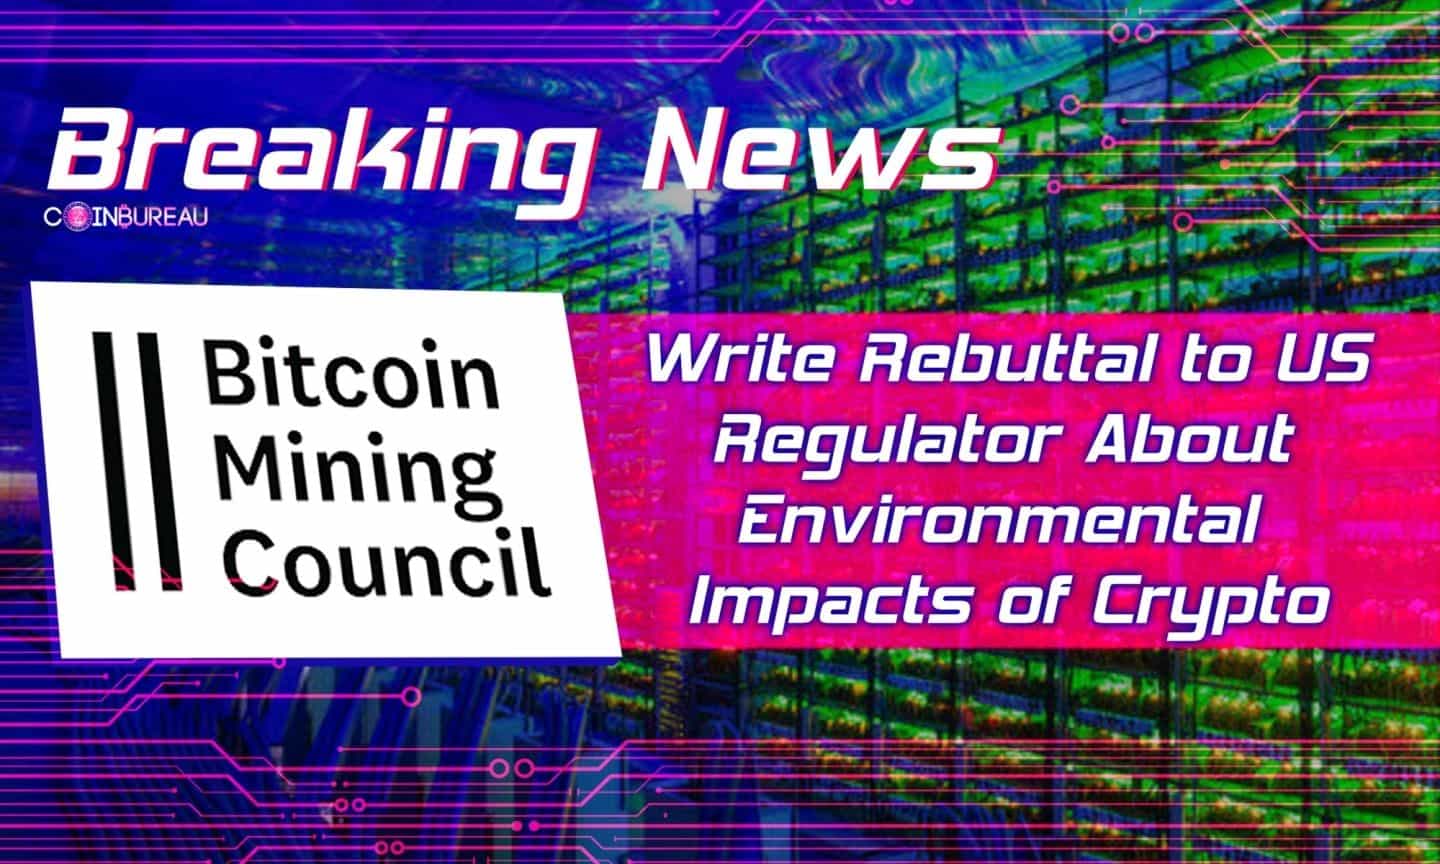 Bitcoin Mining Council Write Rebuttal to US Regulator About Environmental Impacts of Crypto